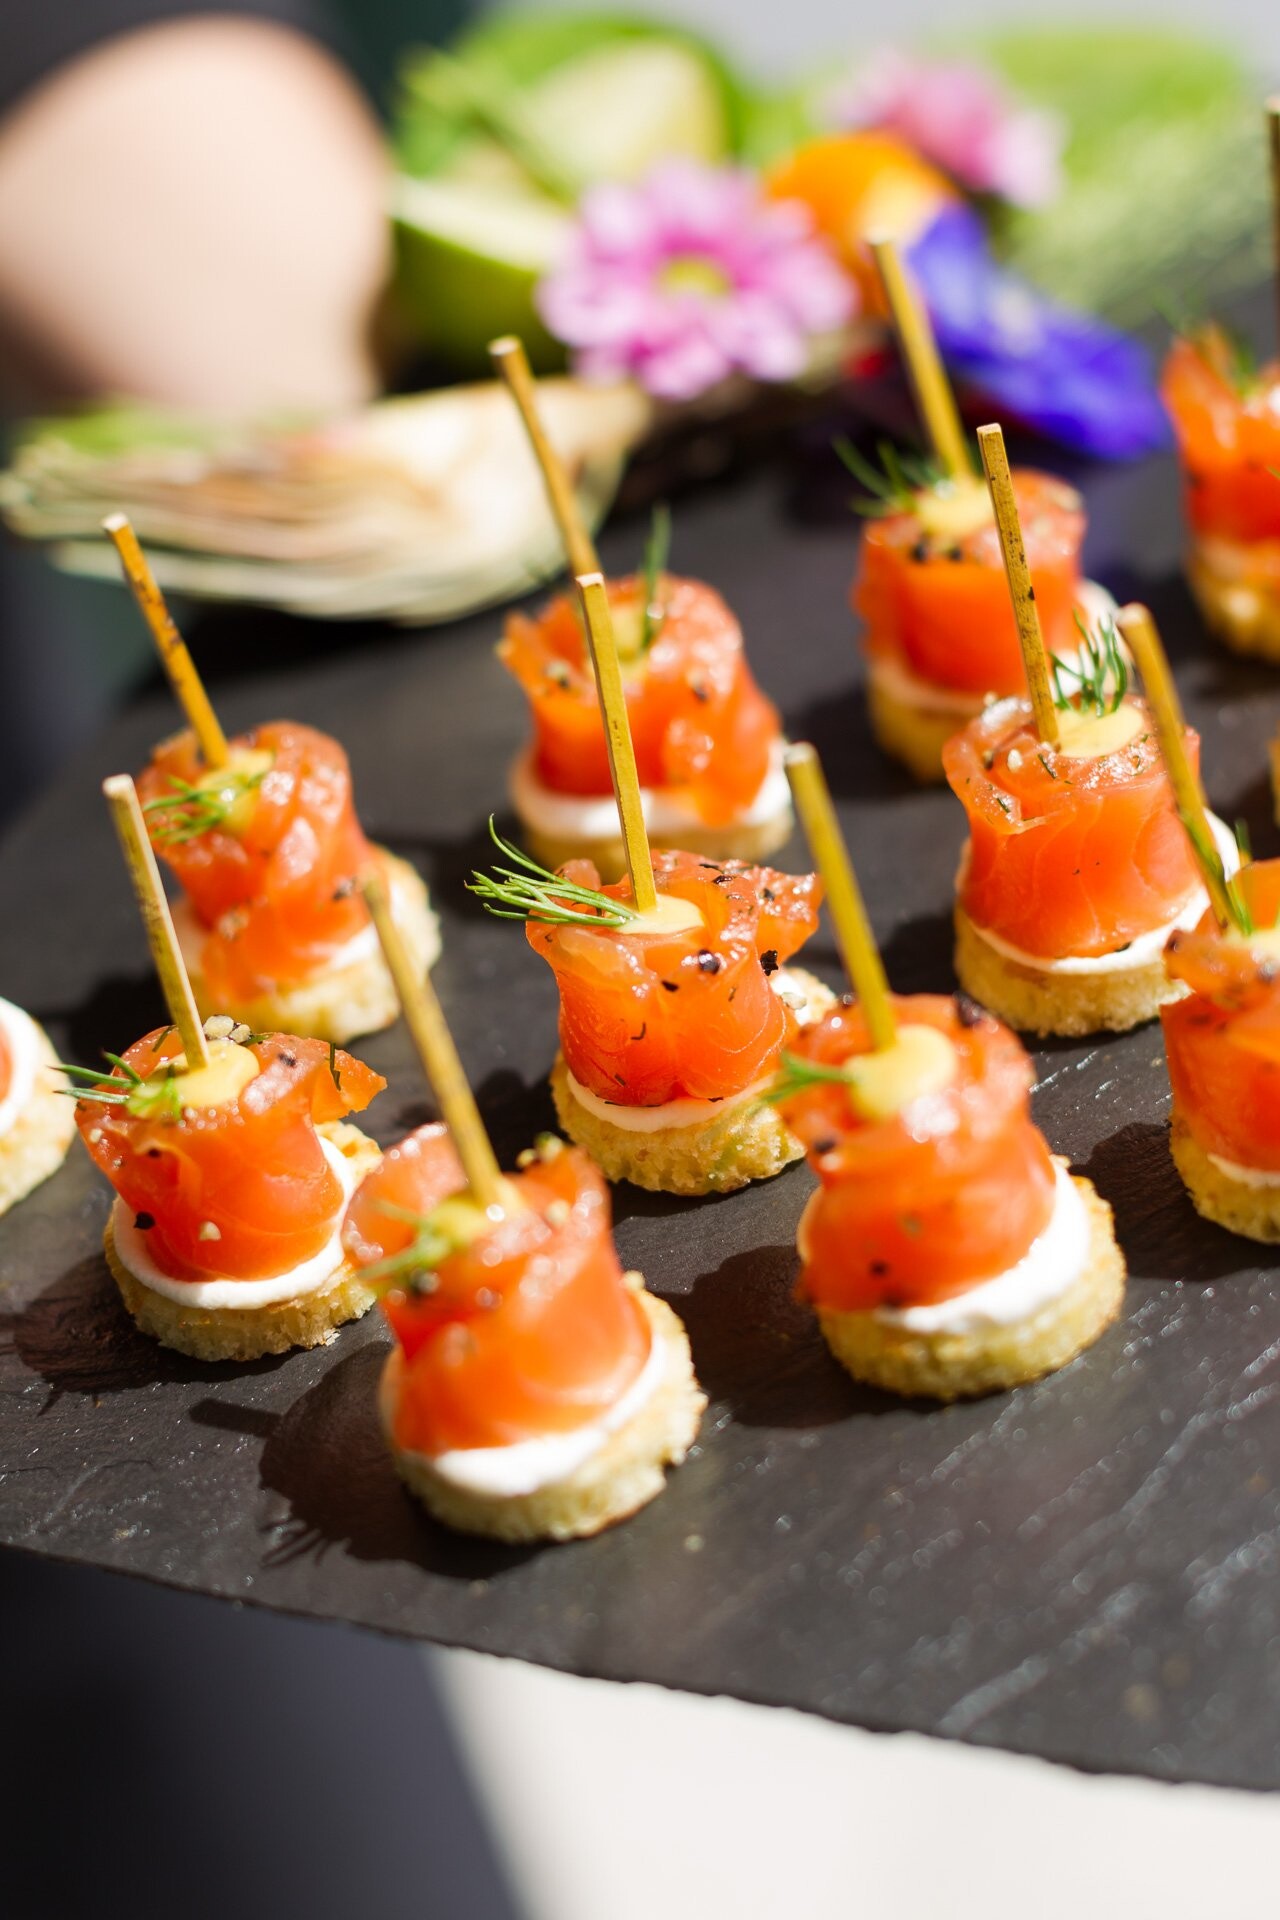 Canapés are not just super delicious, it’s also delightful to photograph these masterpieces! Here you can see some salmon appetizers.